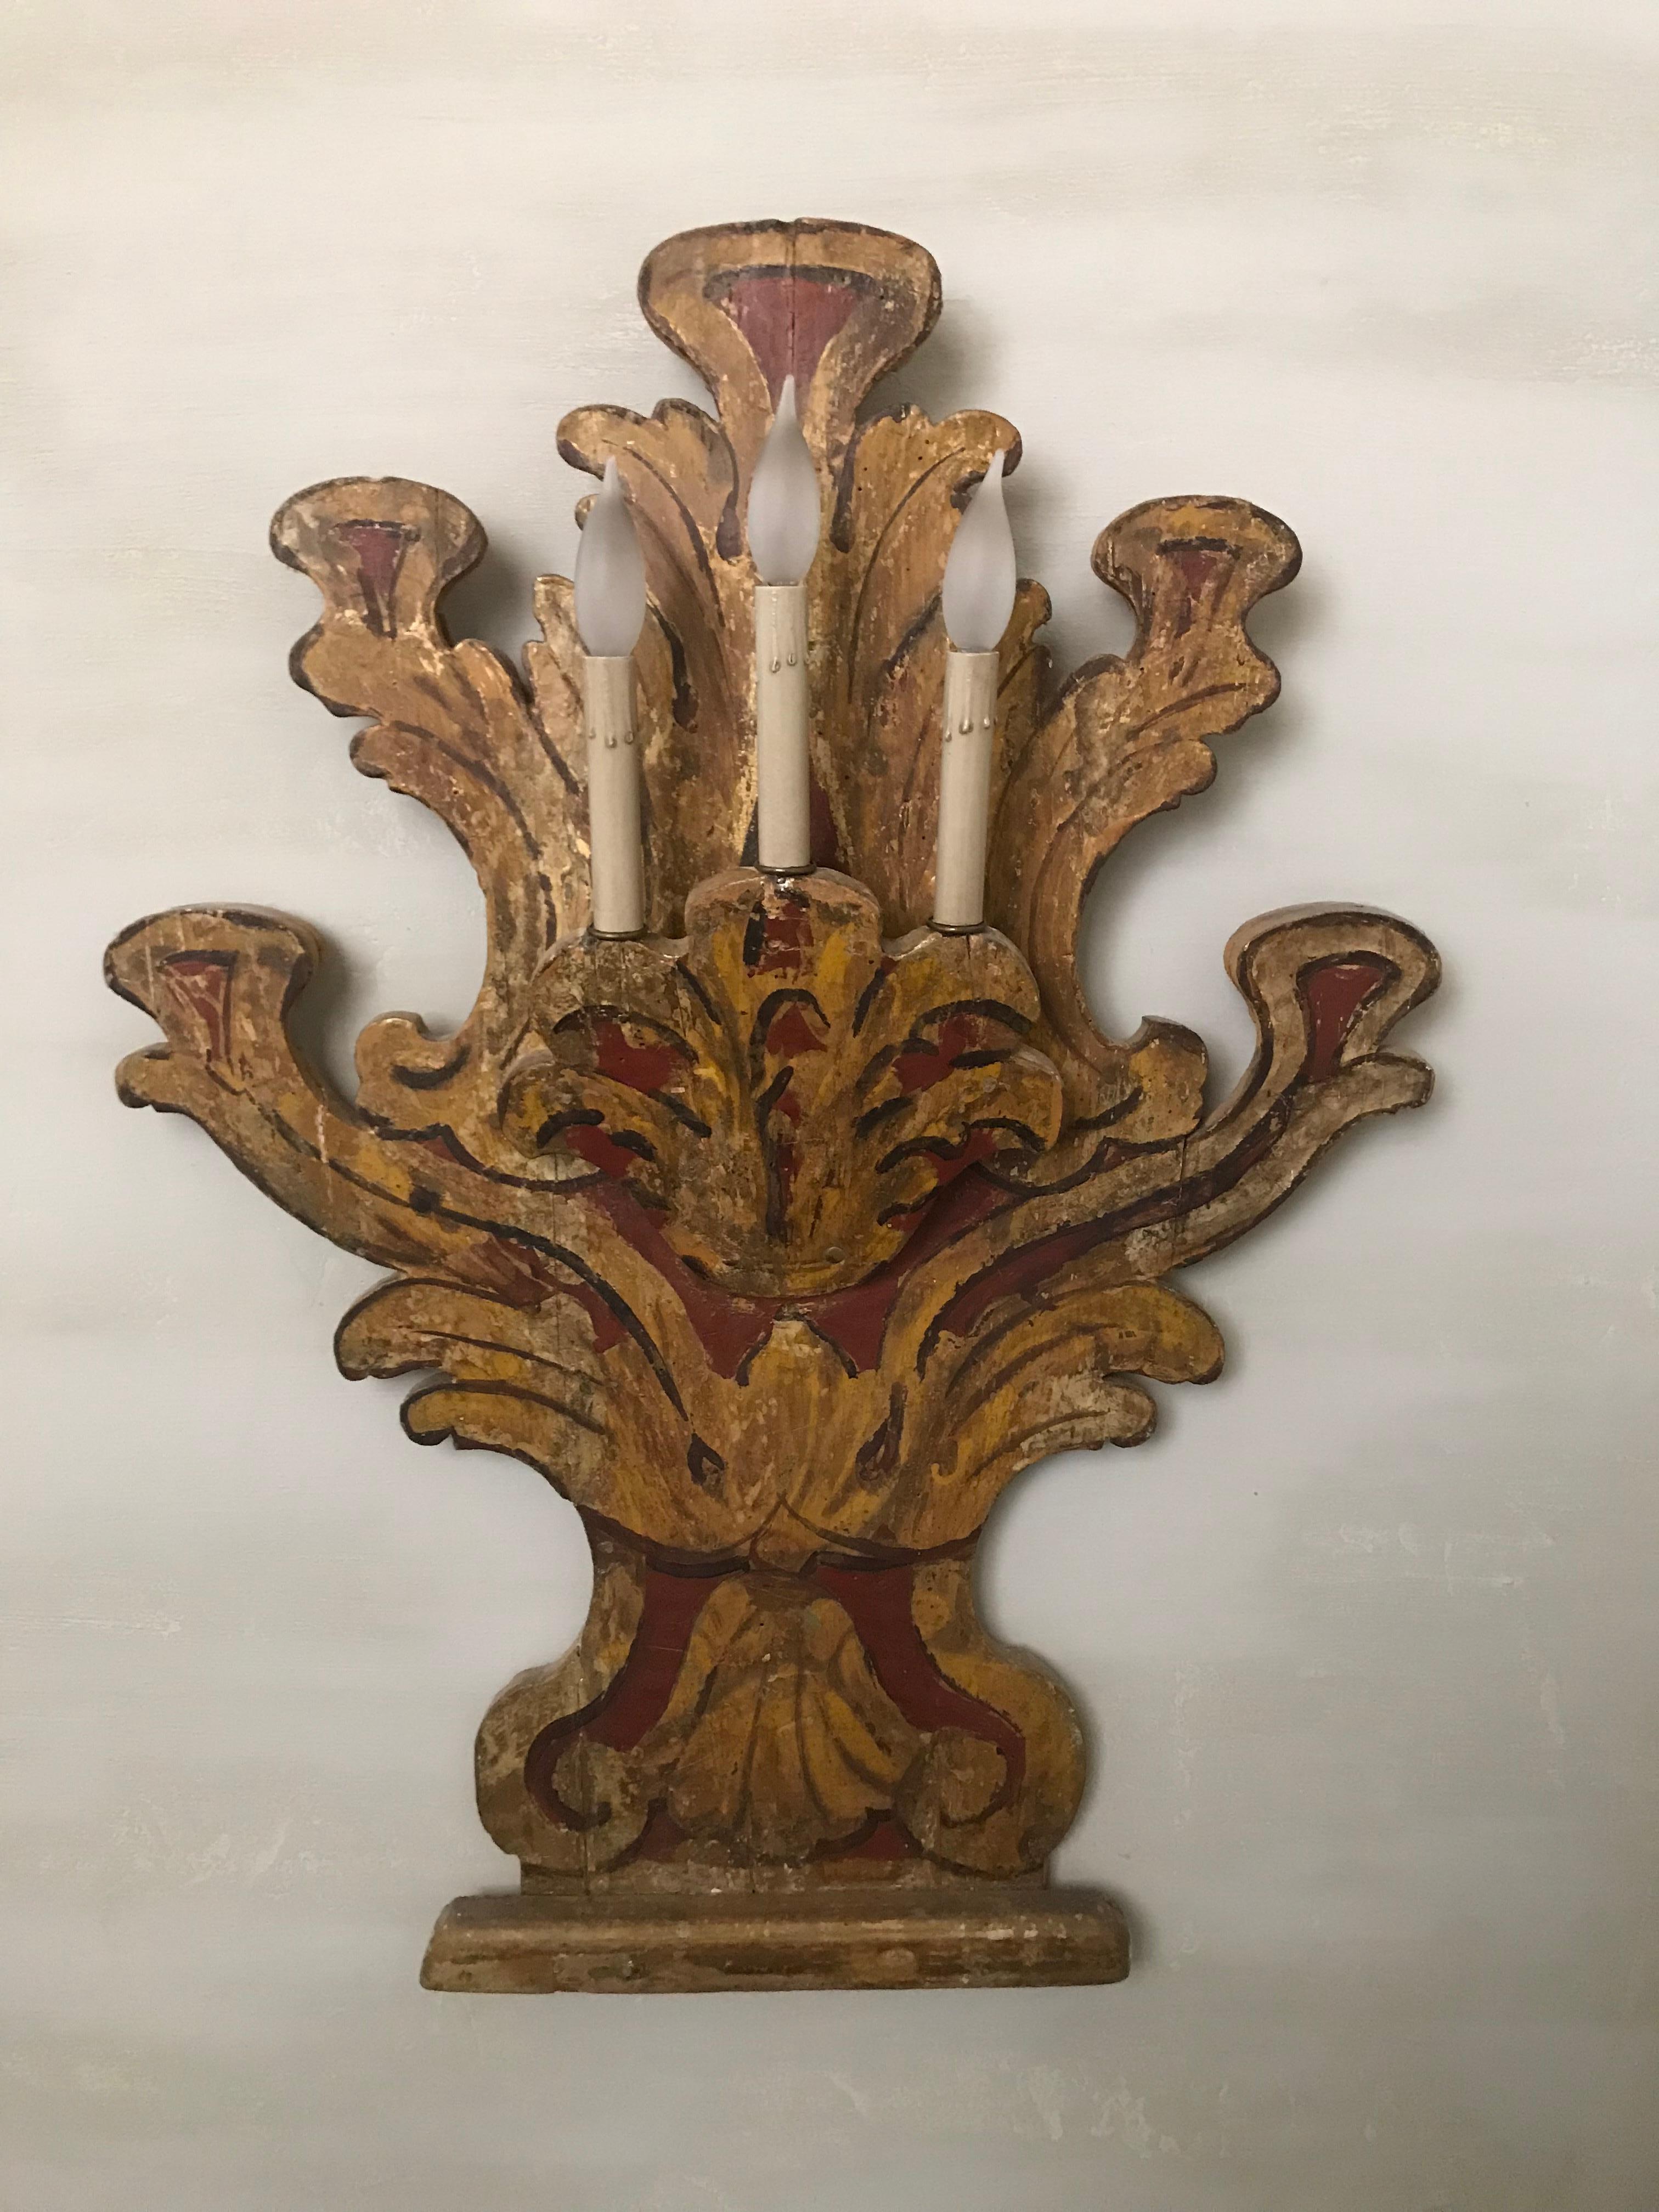 Pair of 18th century Italian sconces made of wood painted in shades of red and gold with black outlines. Each sconce has three candleholders. The sconces mount flat to the wall and ready for electrical installation. The shape is a cut-out curved